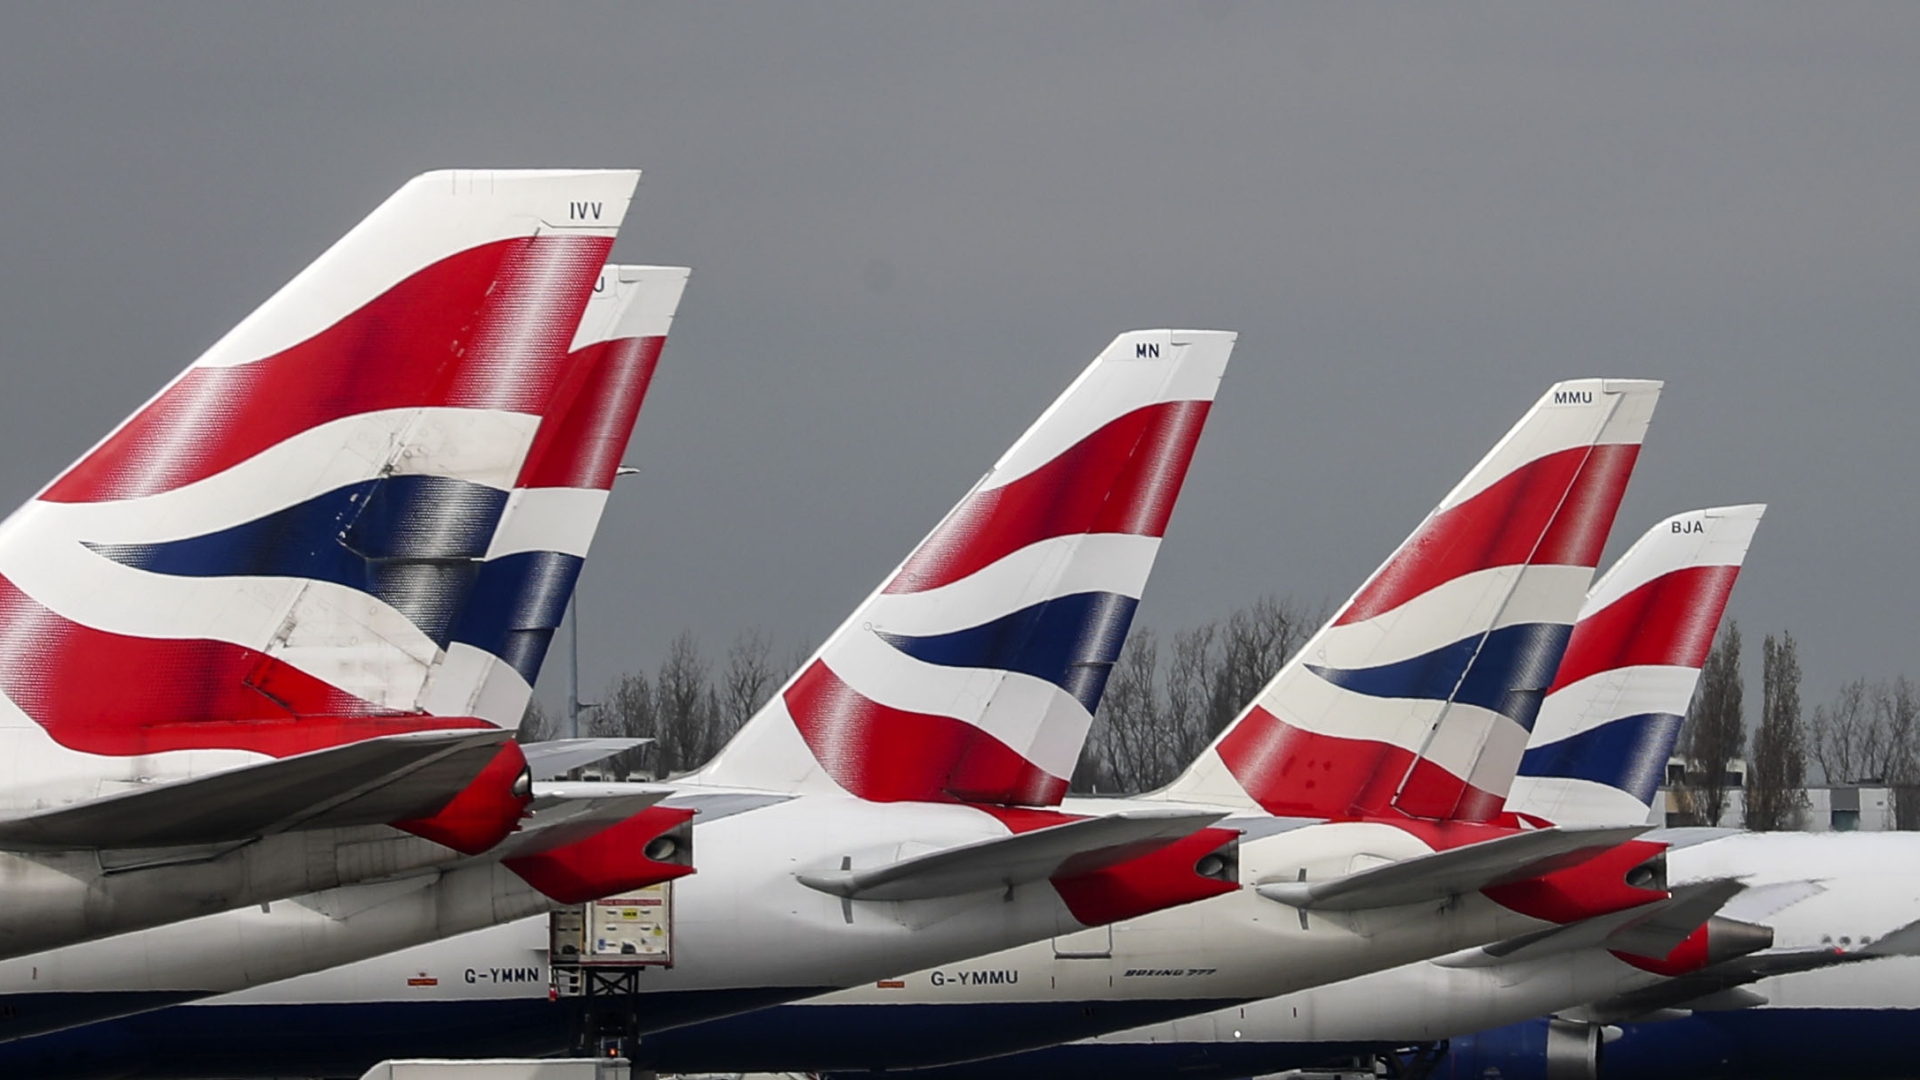 British Airways may suspend long-haul flights departing from major airports due to flight chaos